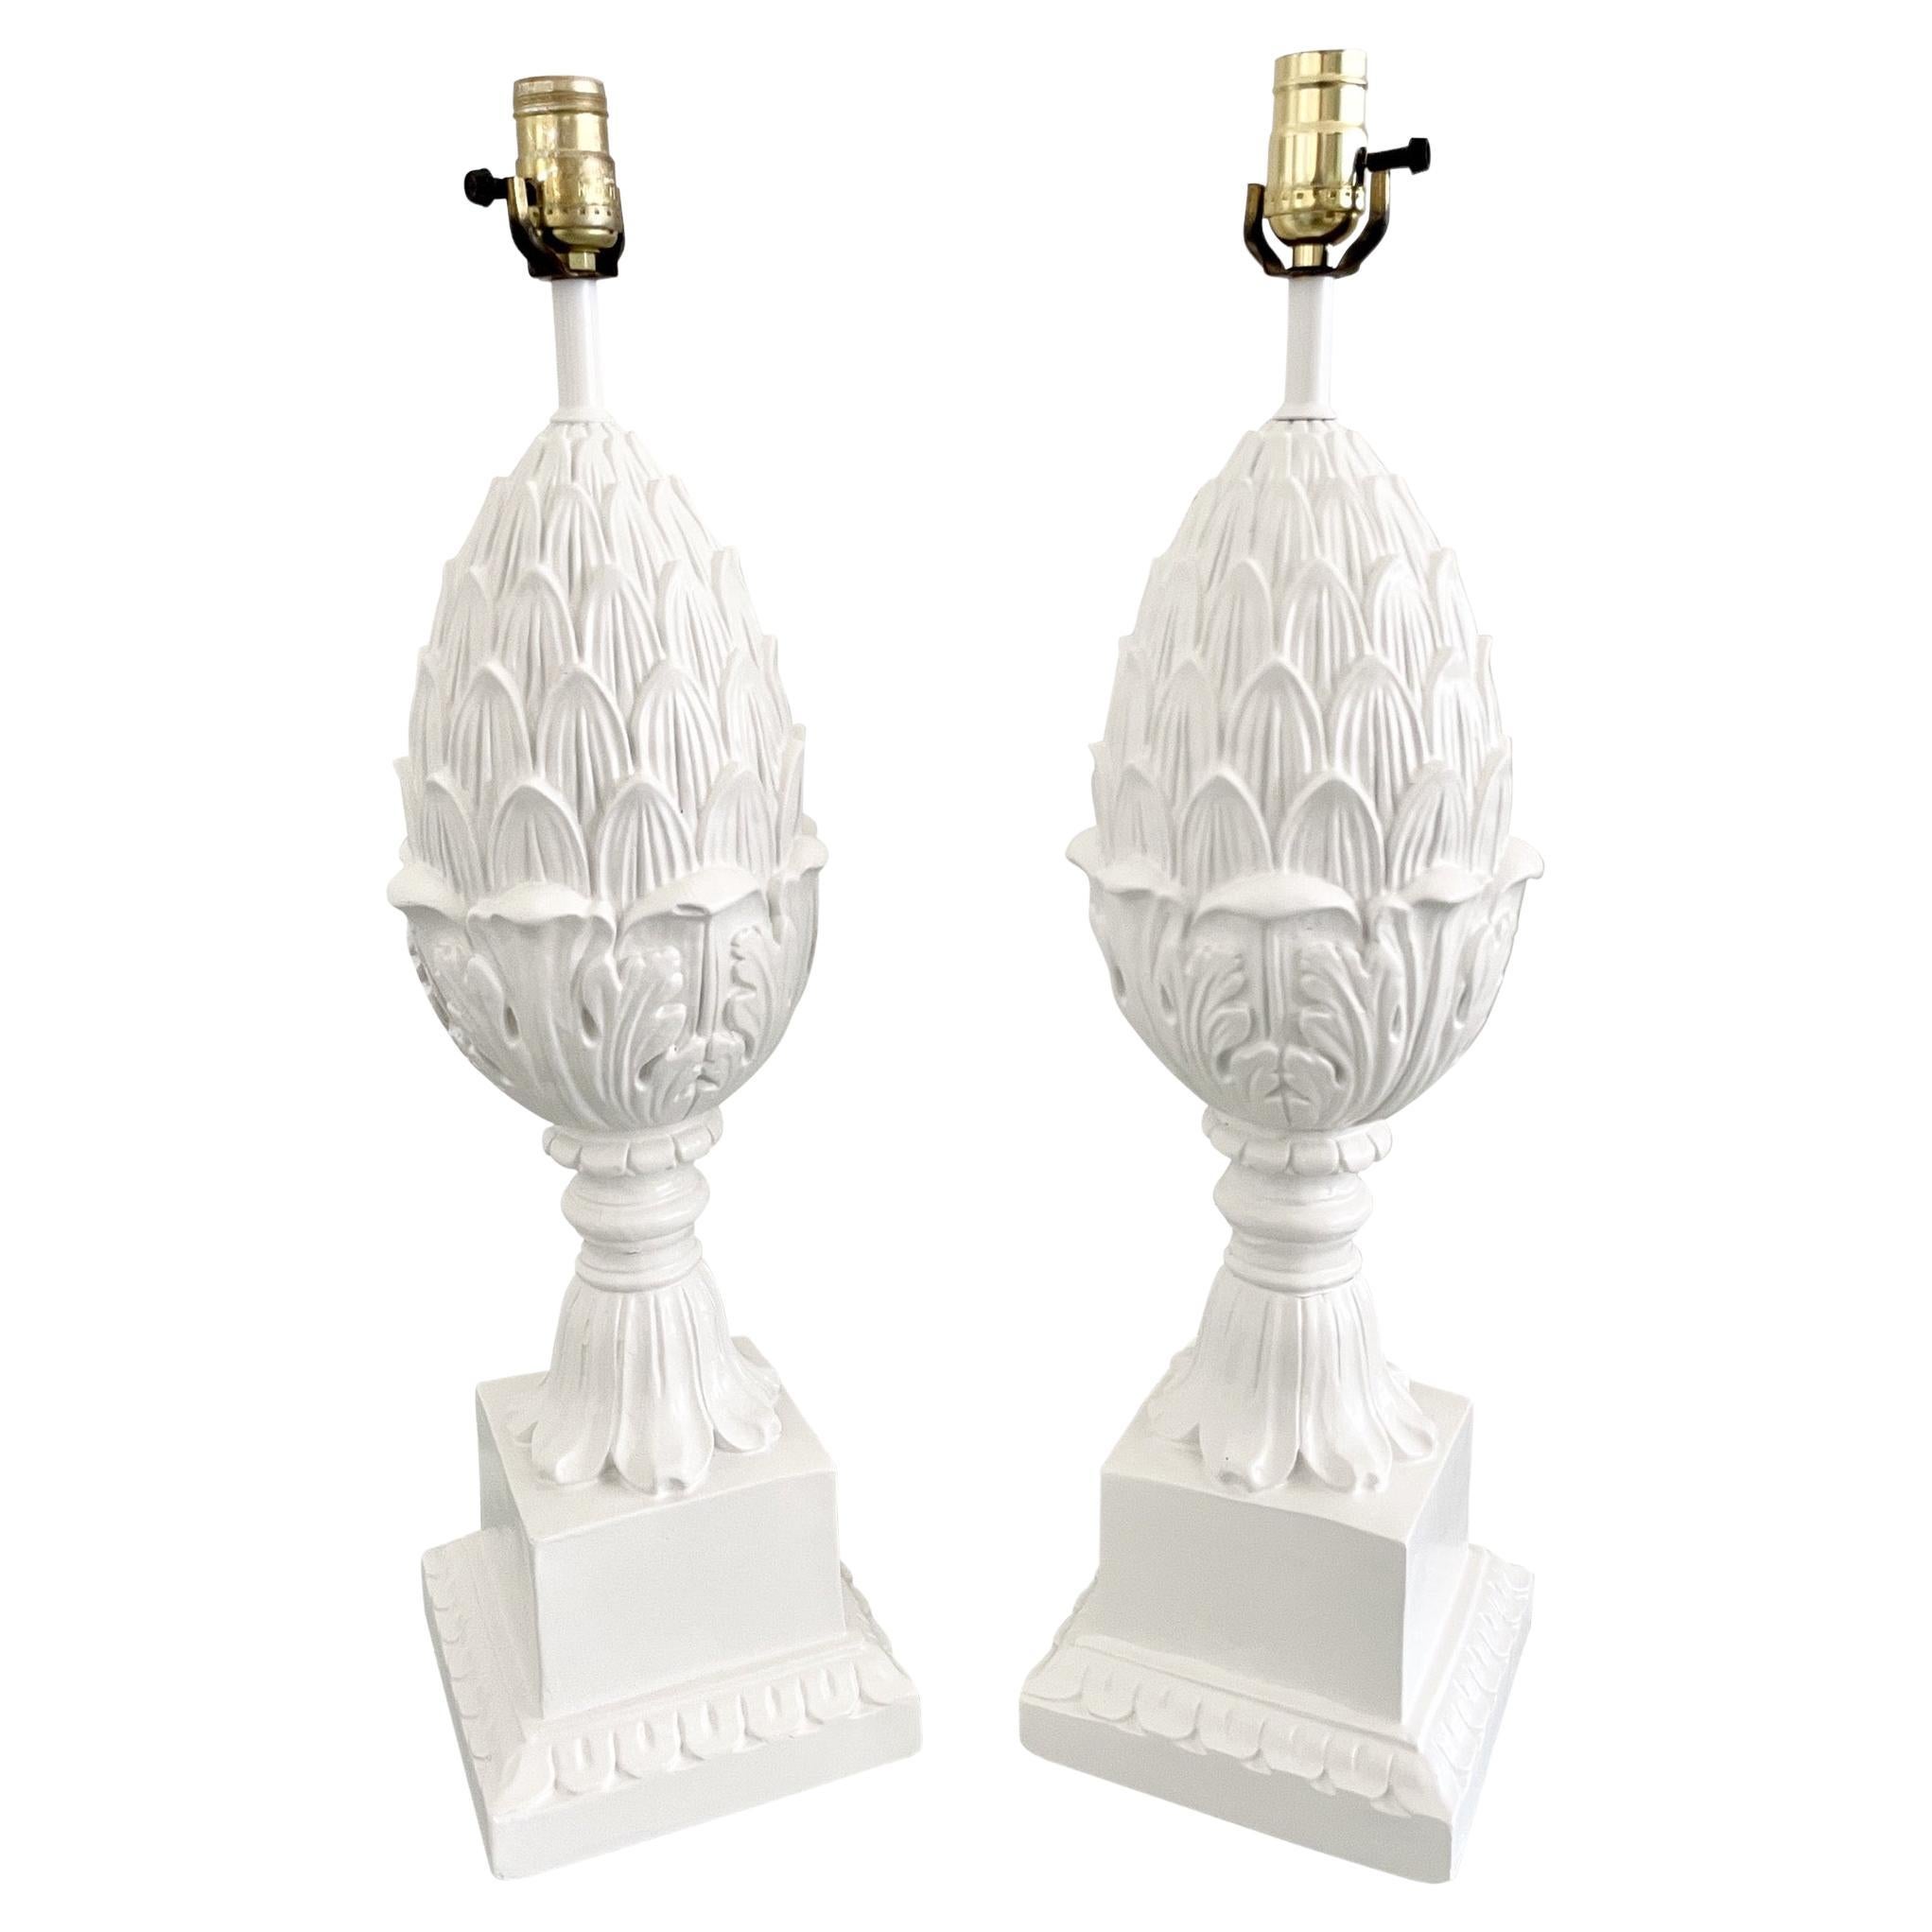 Boho Chic Pineapple Table Lamps, a Pair For Sale